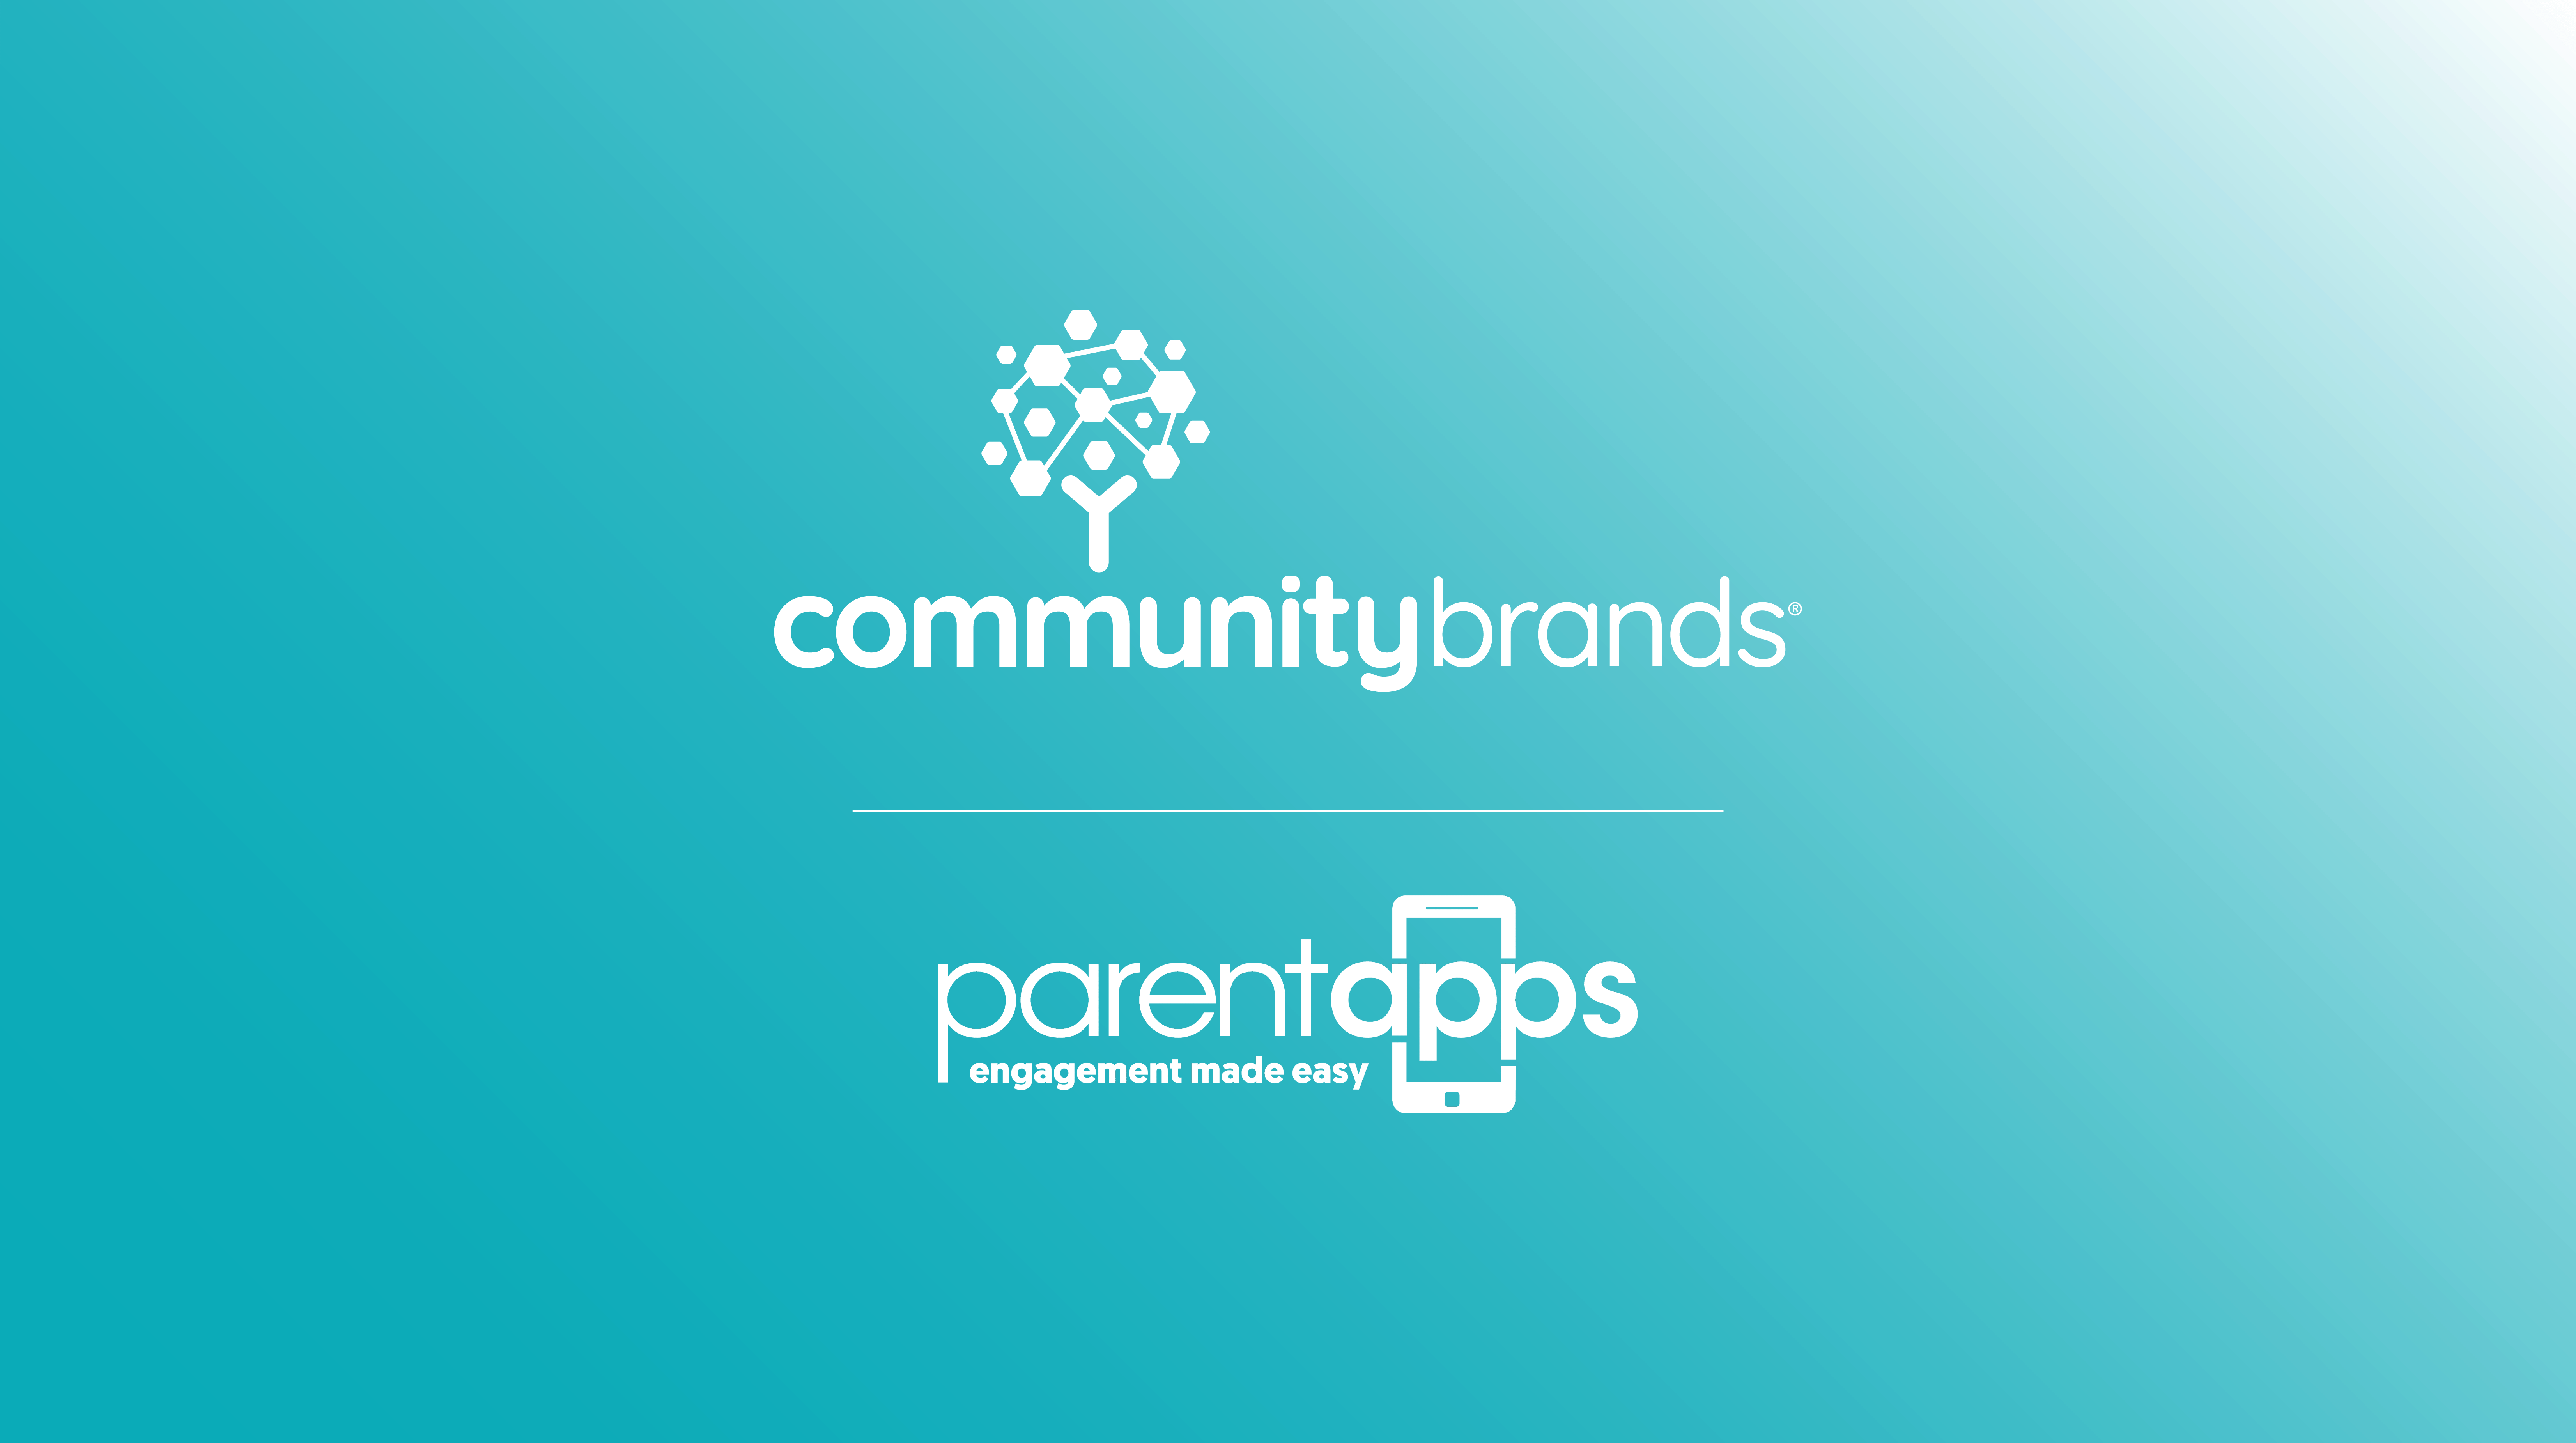 community brands and parentapps